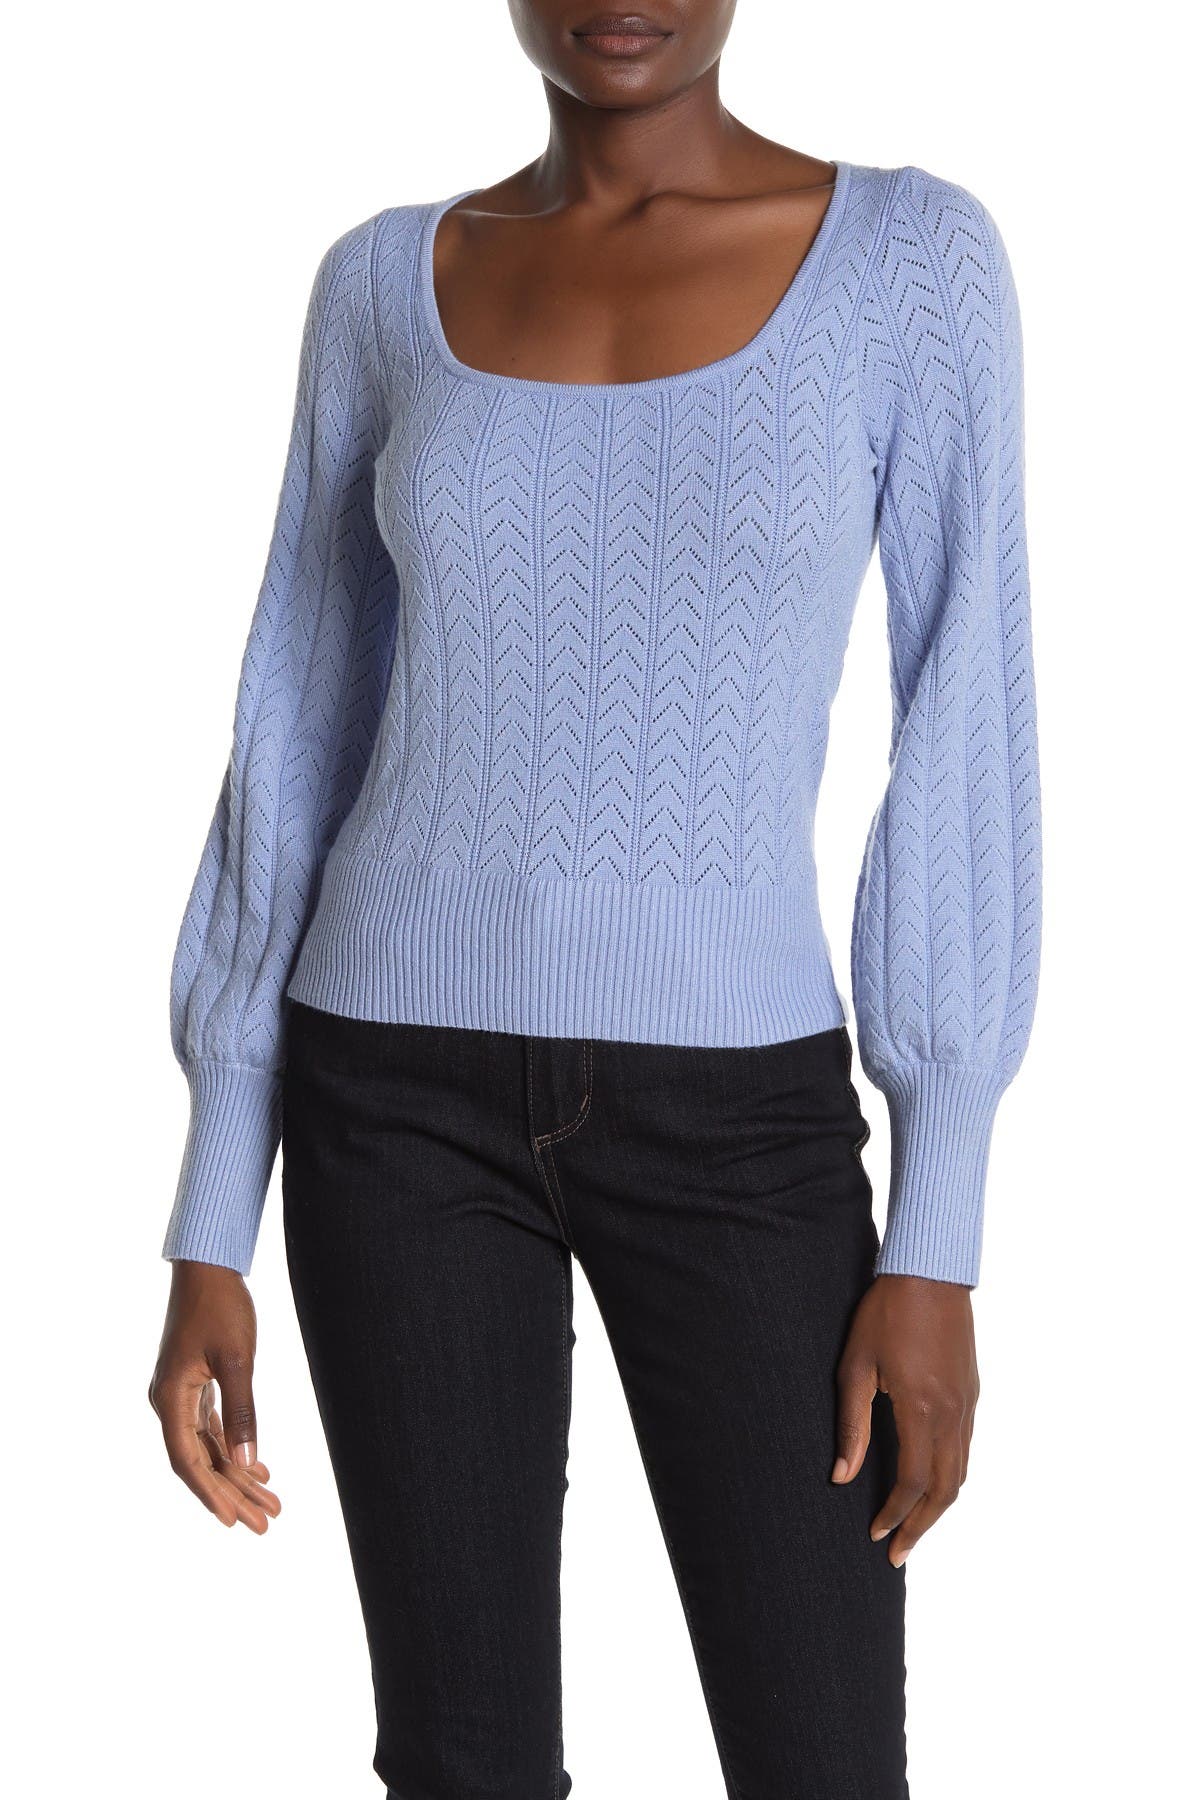 ASTR the Label | Square Neck Puff Sleeve Knit Sweater | HauteLook